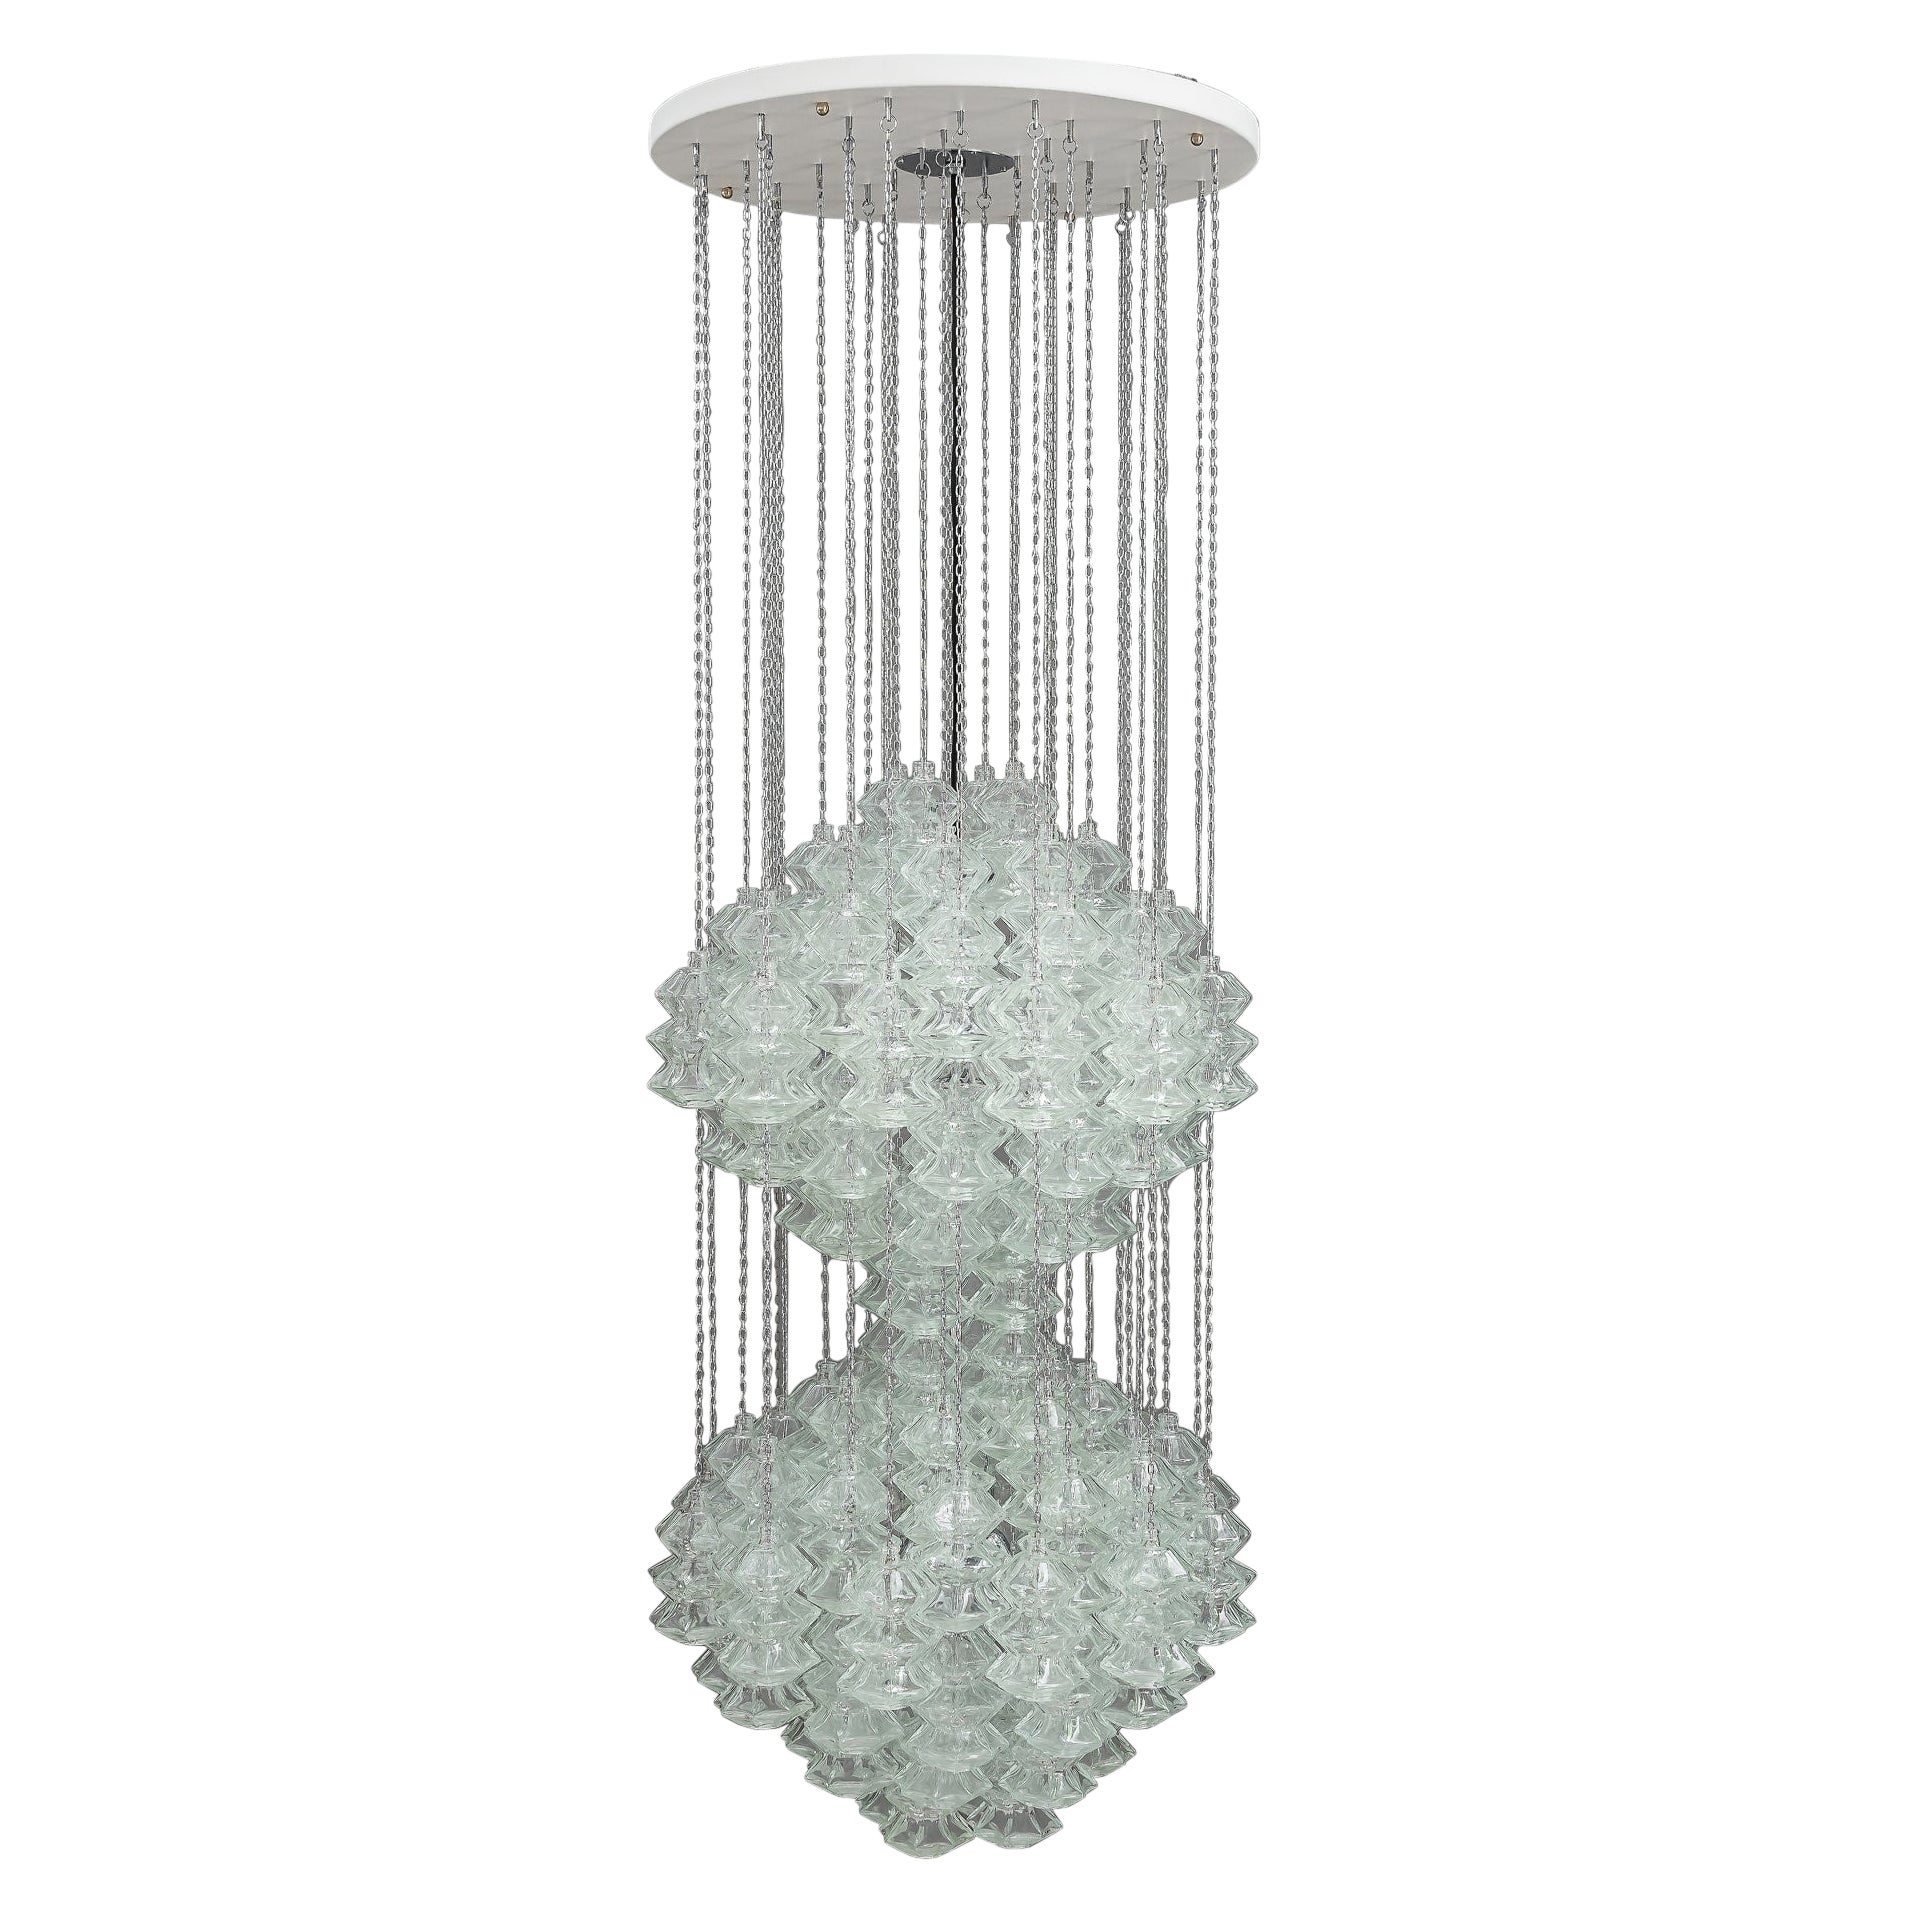 Double "Pagode" Pendant Chandelier by Kalmar, Vienna, c. 1960